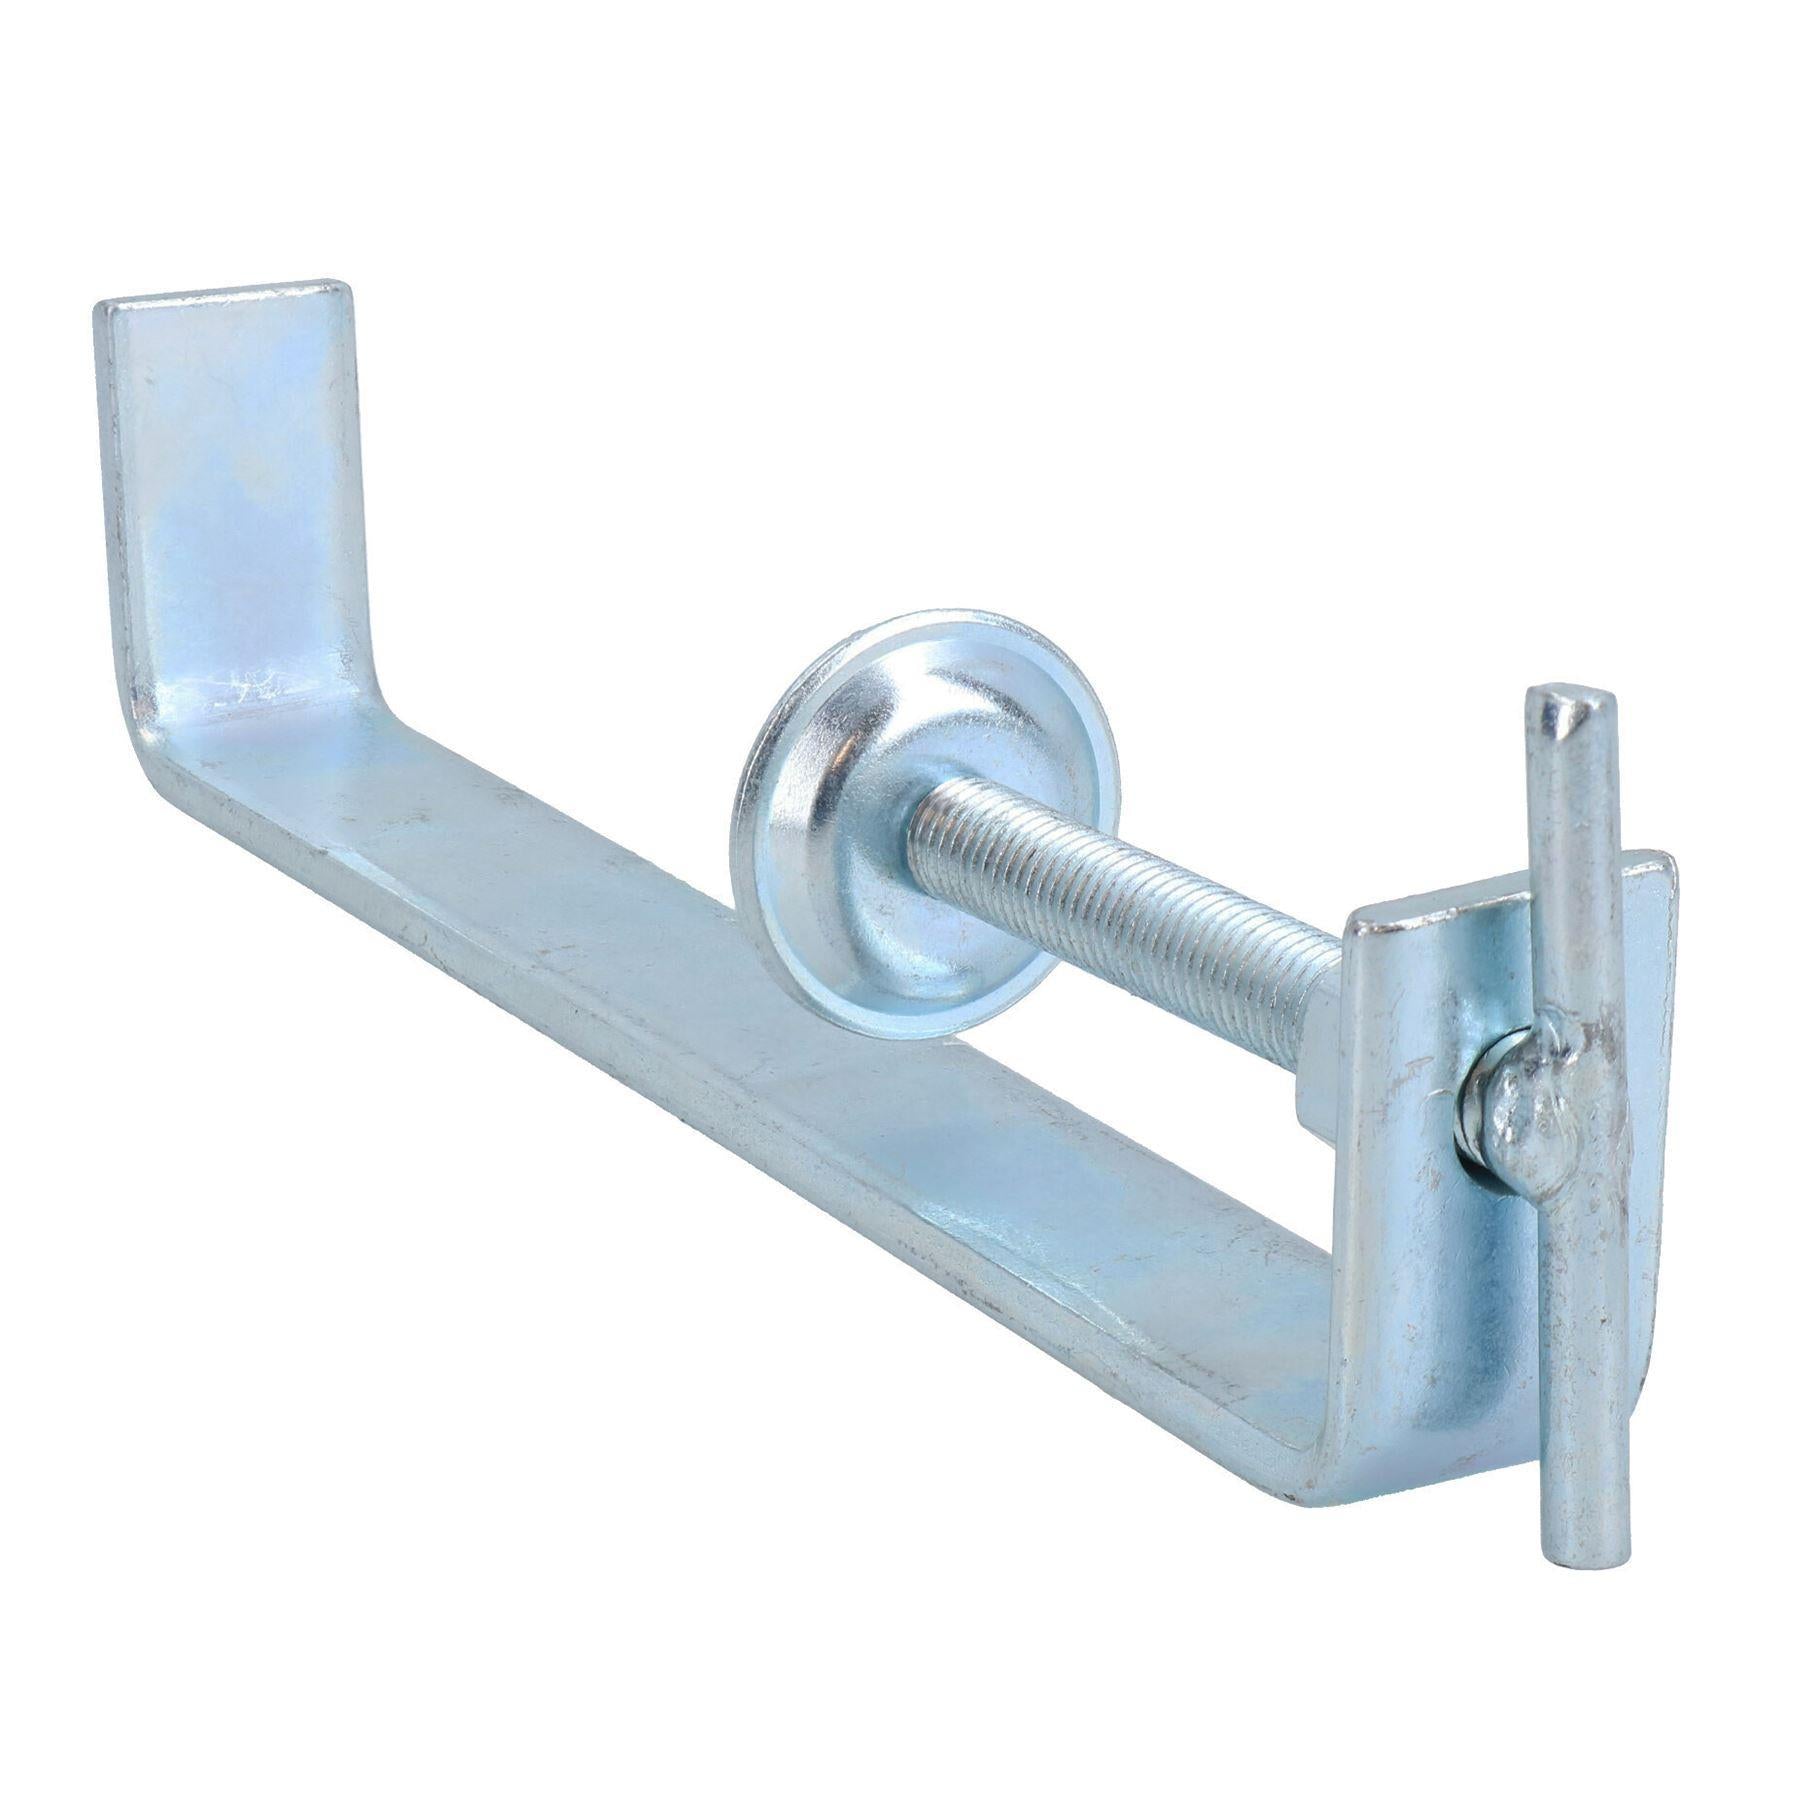 200mm Bricklaying Profile Clamp Holder Fastener Carpentry Internal Wall Clamps